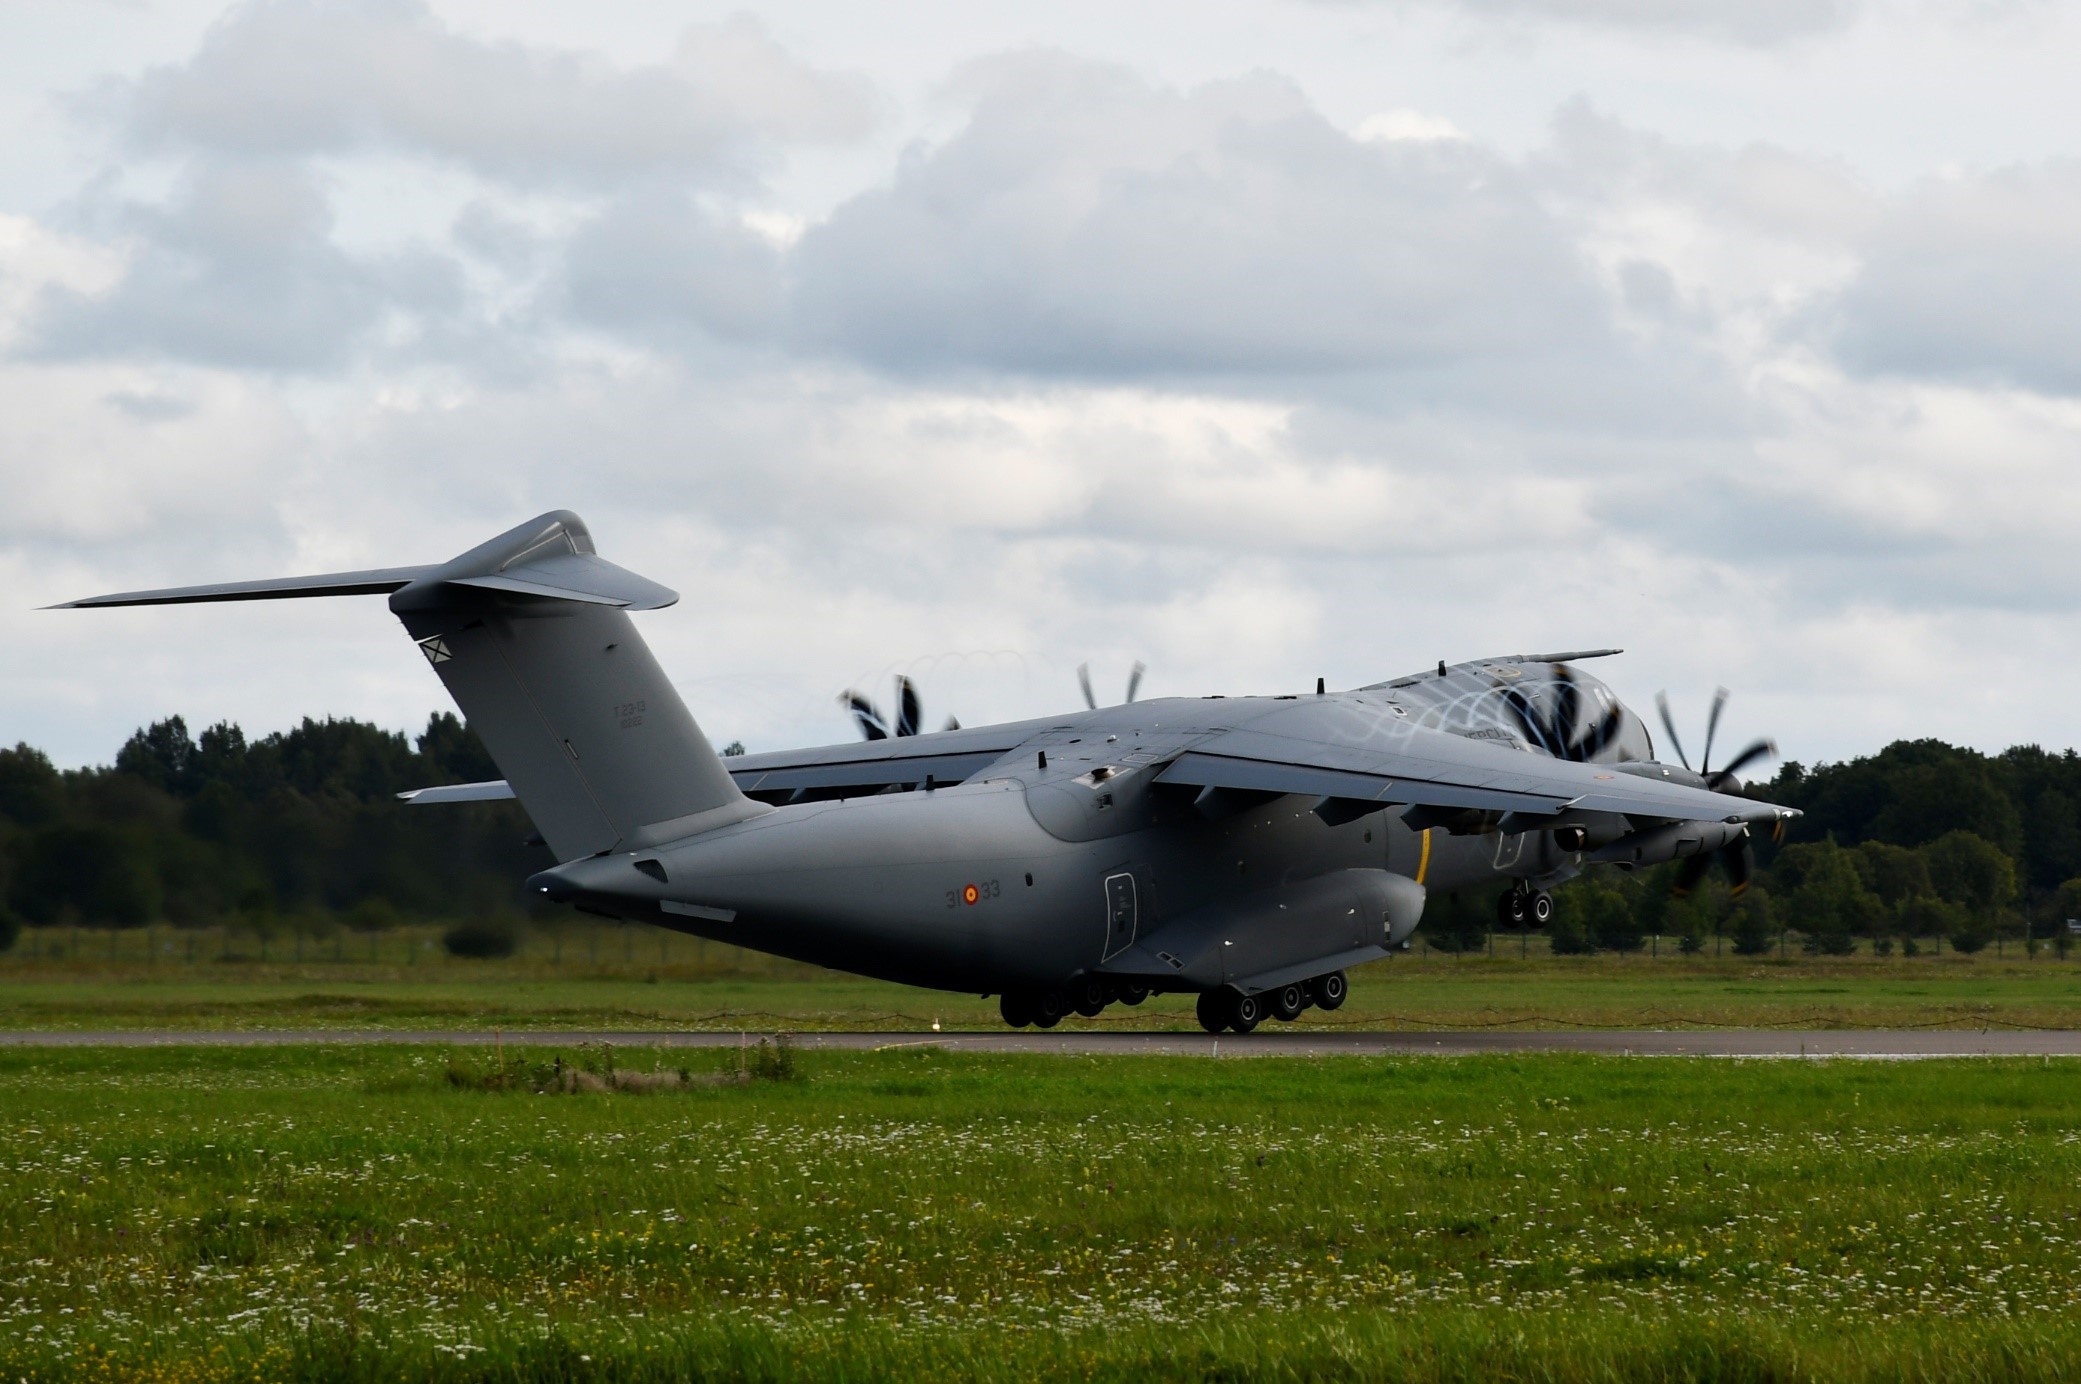 A400M take-off at Ämari at the end of its deployment